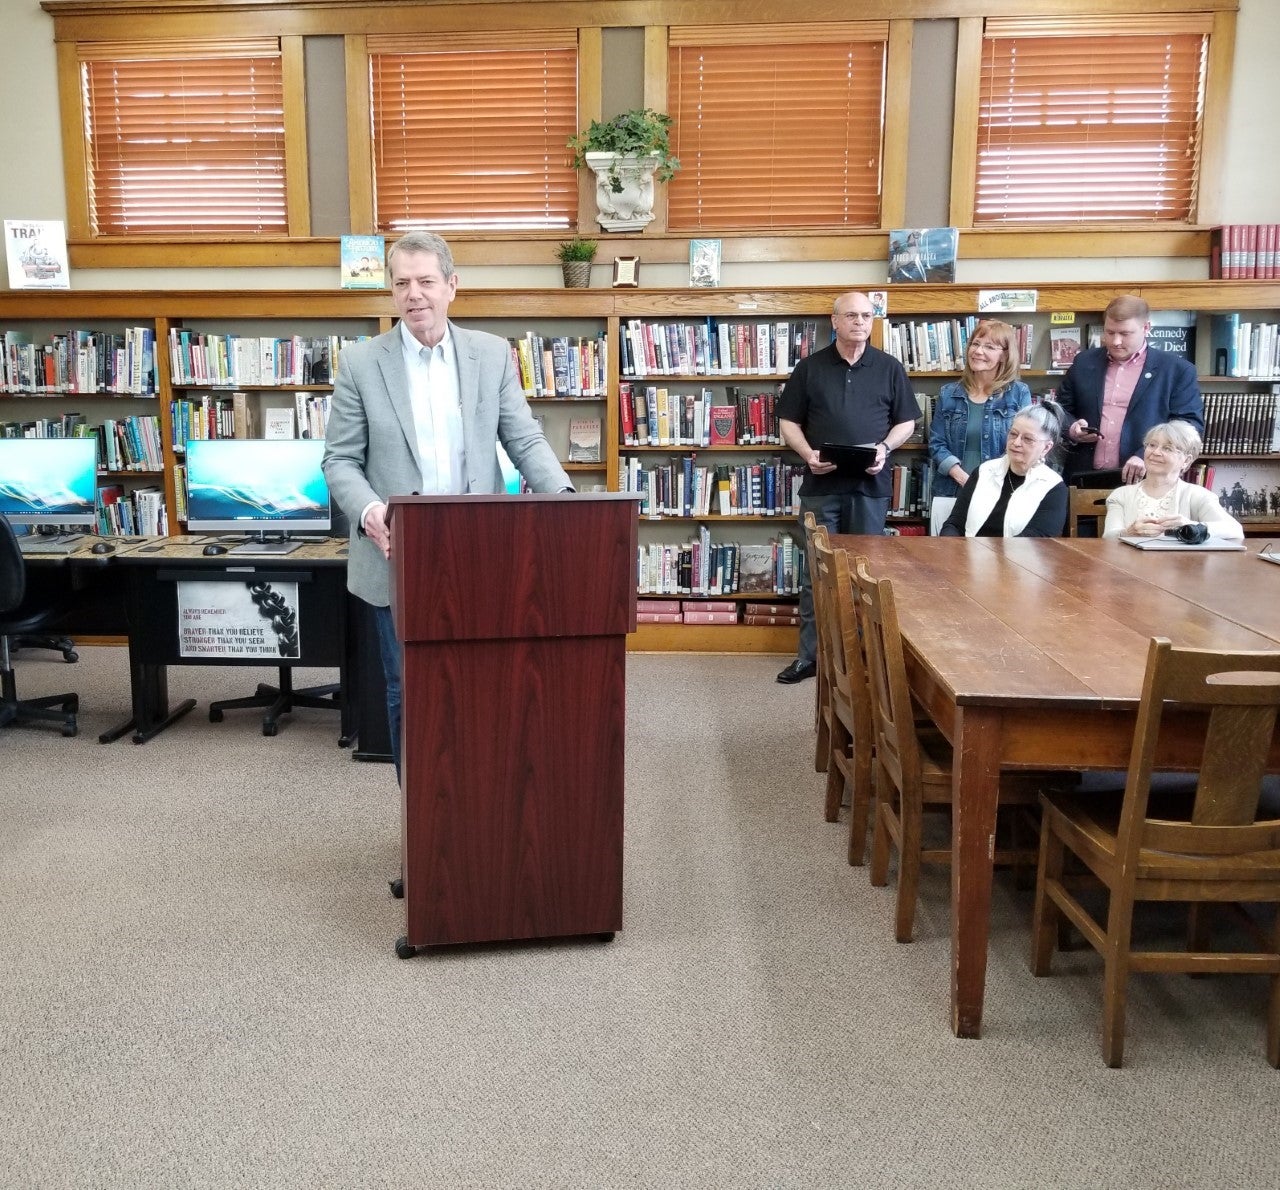 Governor Pillen Promotes Broadband Connections During National Library Week